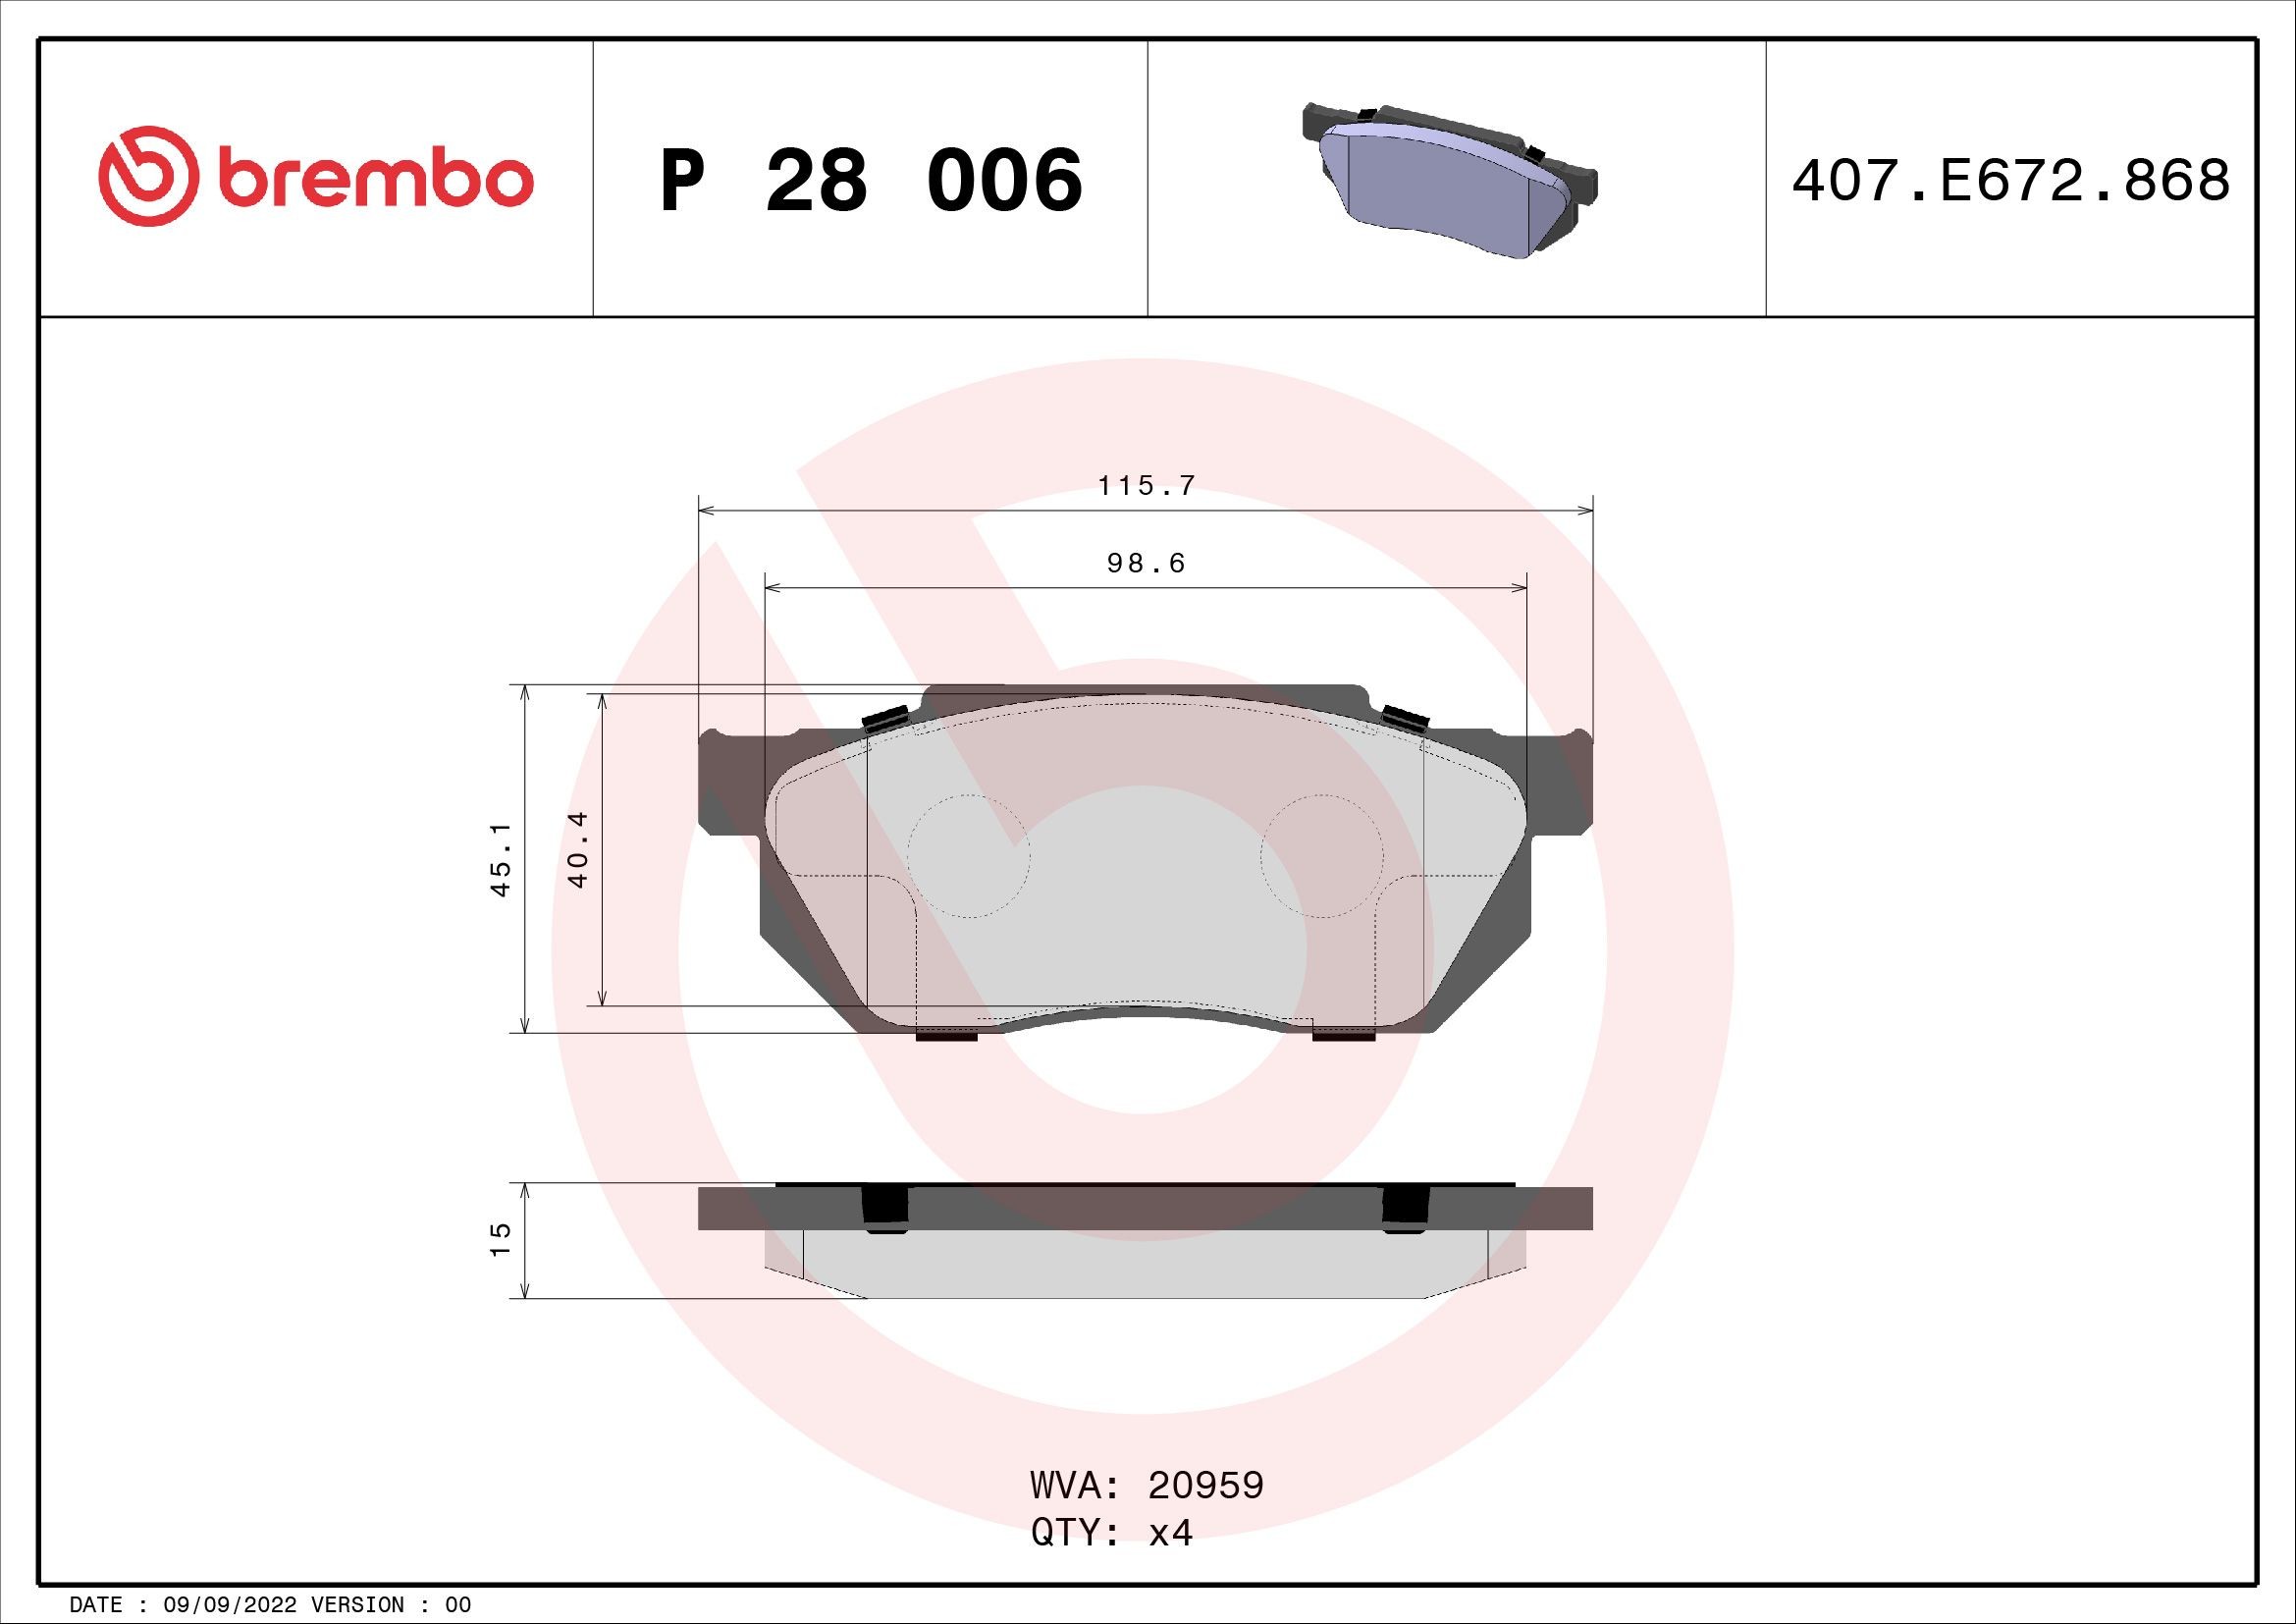 BREMBO P 28 006 Brake pad set excl. wear warning contact, without accessories